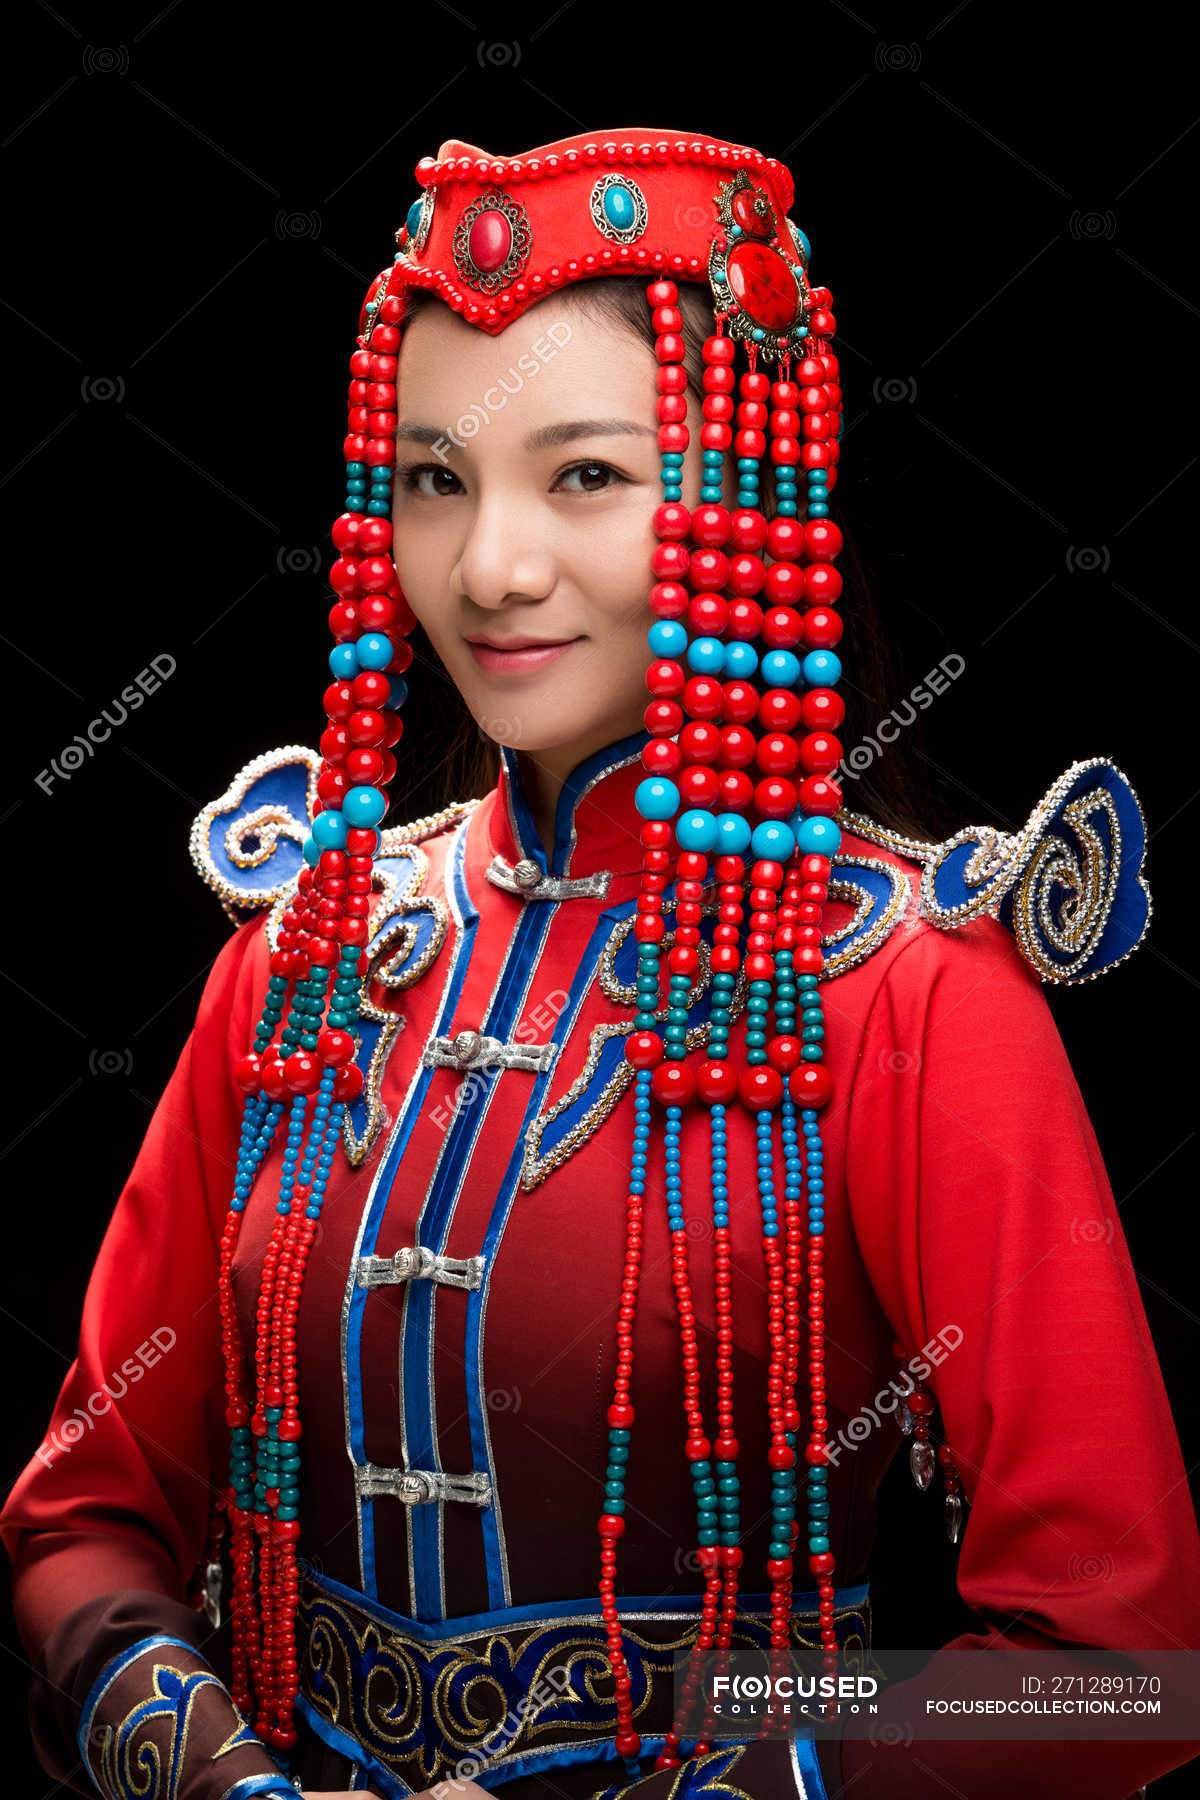 https://st.focusedcollection.com/23619988/i/1800/focused_271289170-stock-photo-beautiful-young-woman-mongolian-costume.jpg